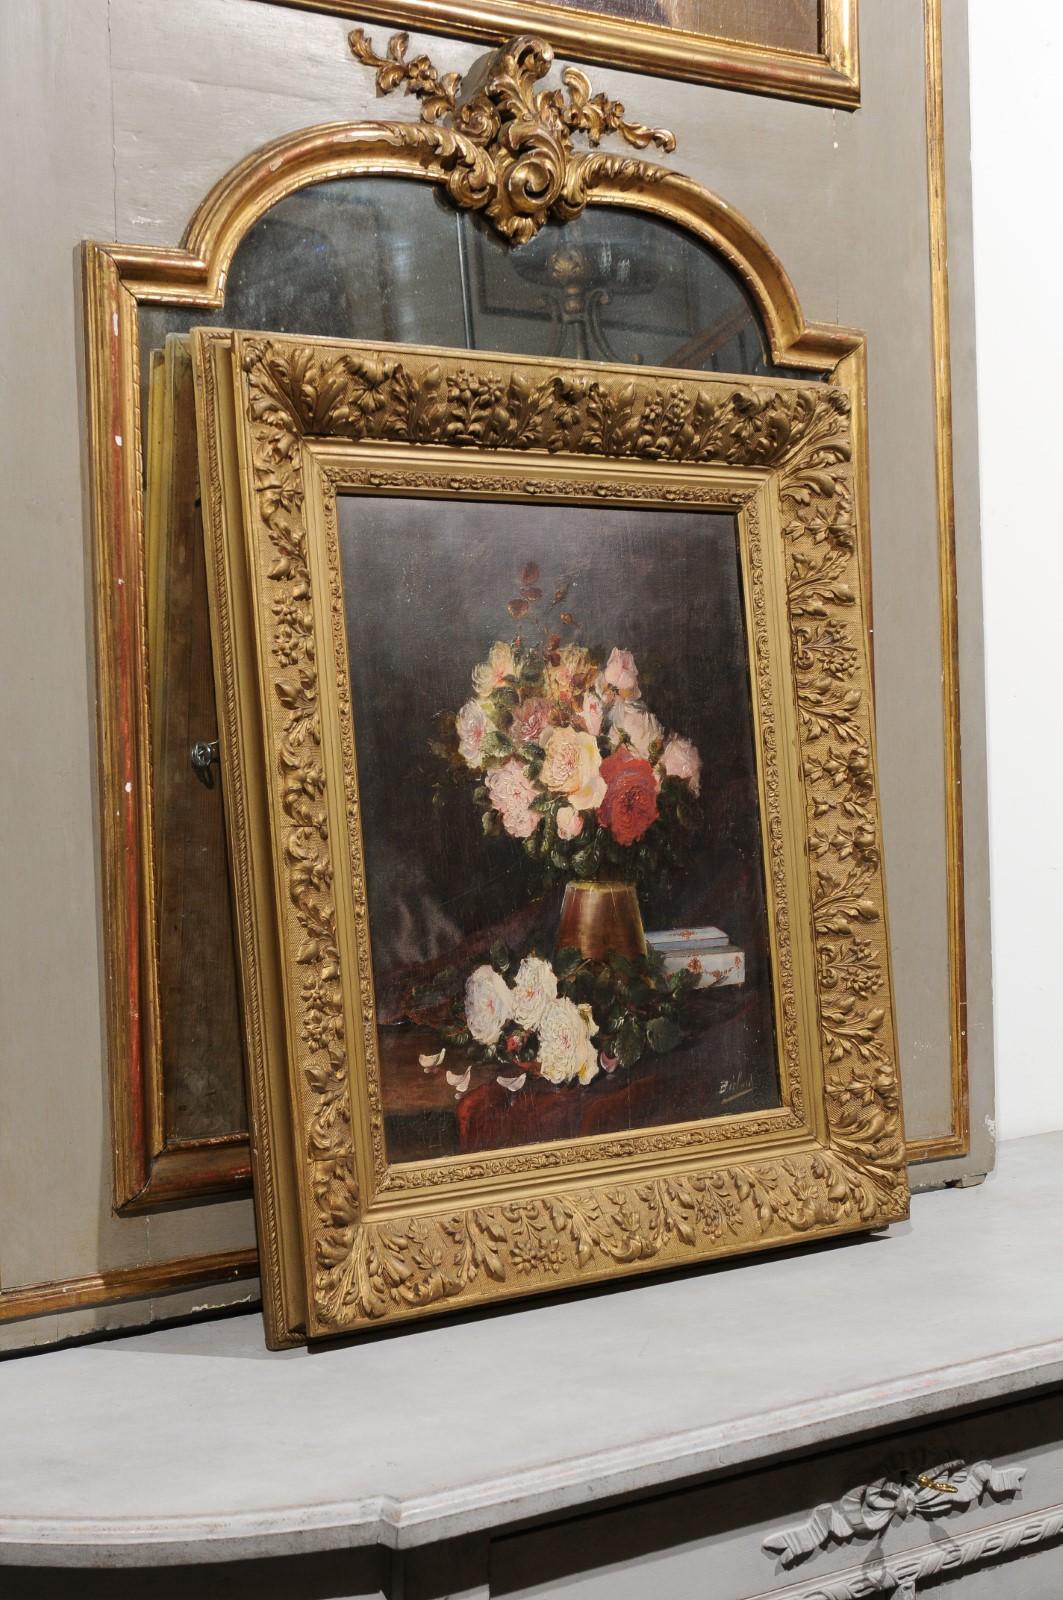 19th Century French Floral Still-Life Painting Depicting Roses in Original Frame For Sale 1